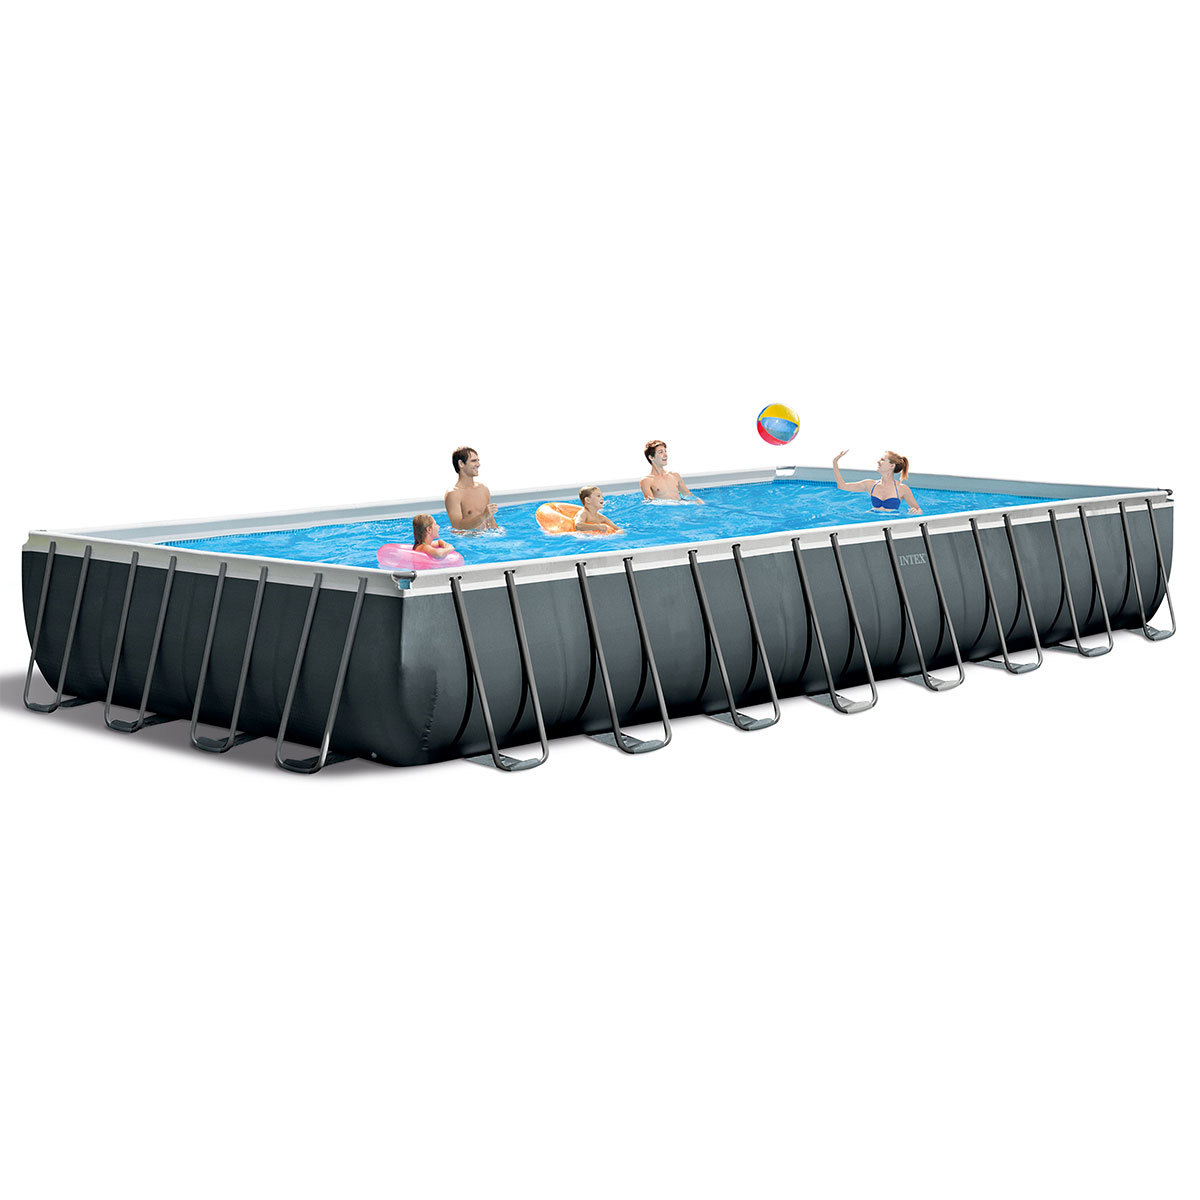 Intex 32ft (9.8m) x 16ft (4.9m) Ultra XTR Rectangular Frame Pool with Sand Filter Pump, Saltwater System and Accessories